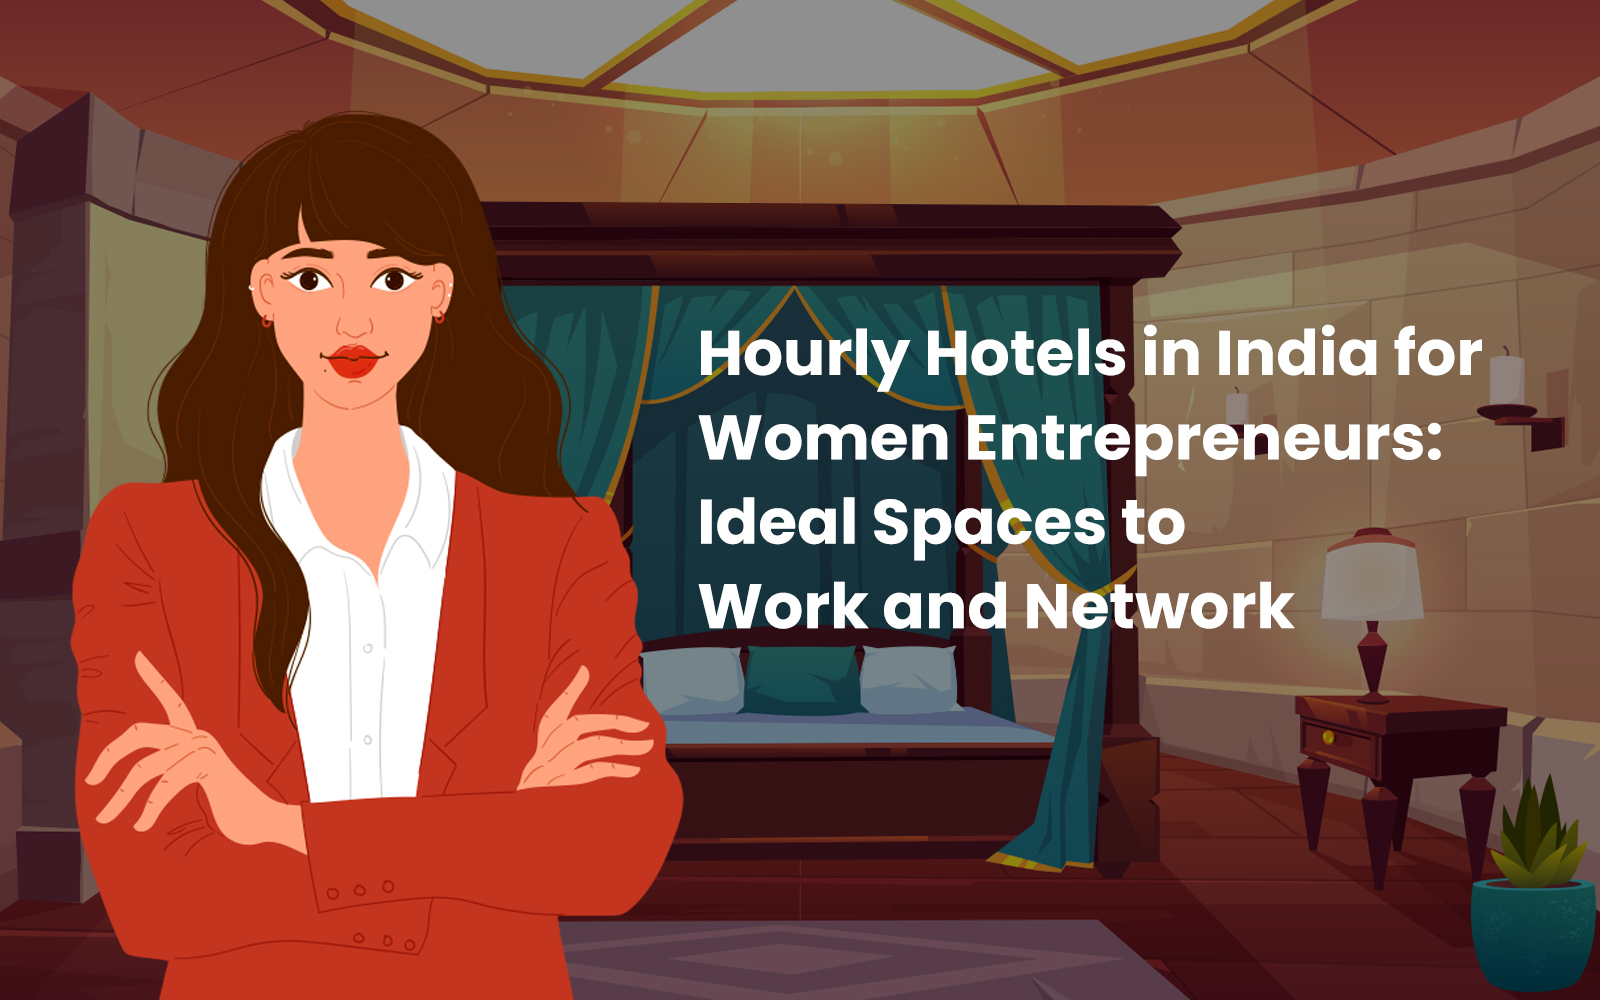 Hourly Hotels in India for Women Entrepreneurs: Ideal Spaces to Work and Network